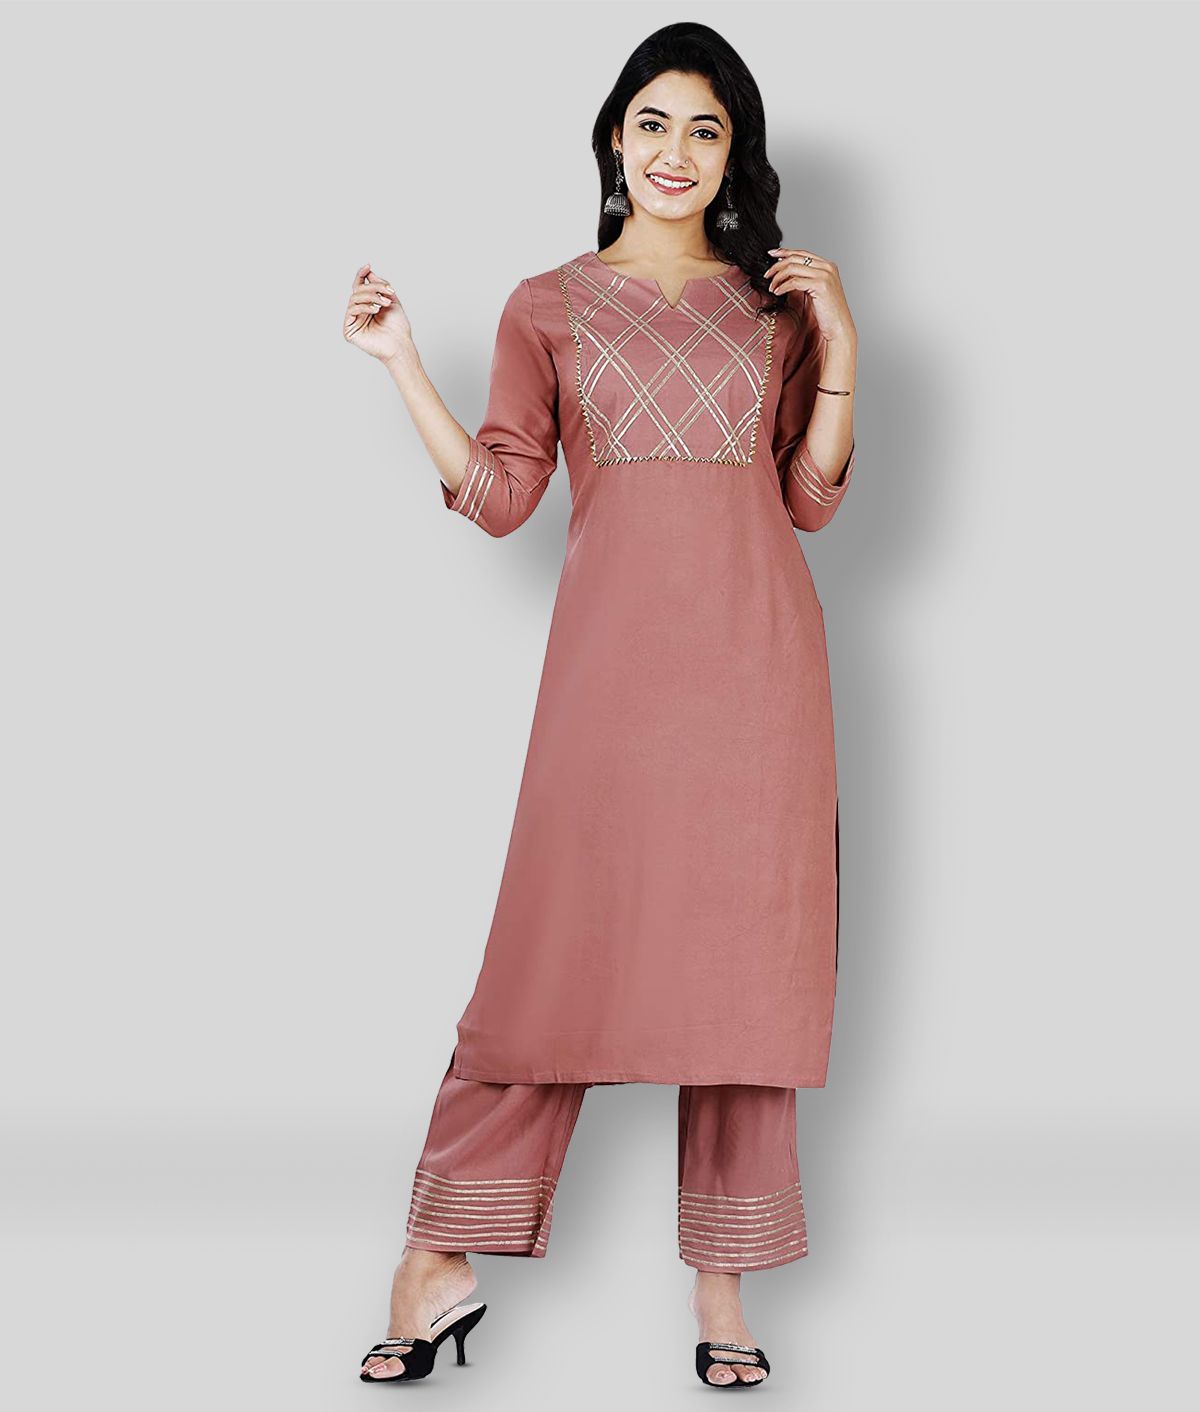     			G4Girl - Mauve Straight Rayon Women's Stitched Salwar Suit ( Pack of 1 )